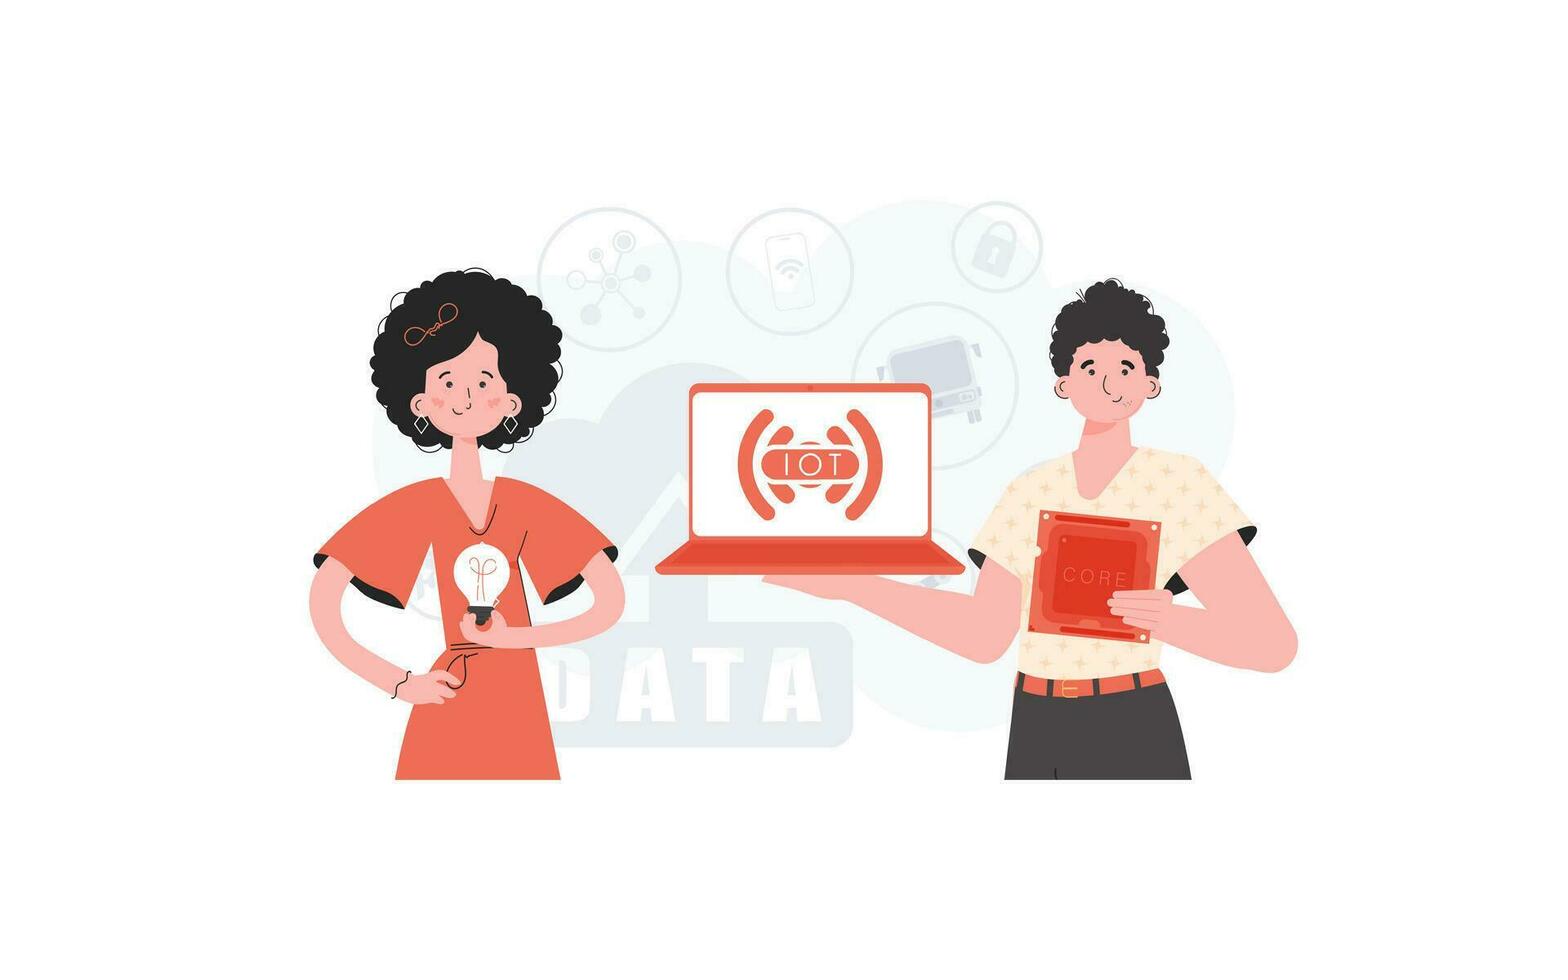 The girl and the guy are a team in the field of Internet of things. IoT concept. Good for websites and presentations. Vector illustration in trendy flat style.